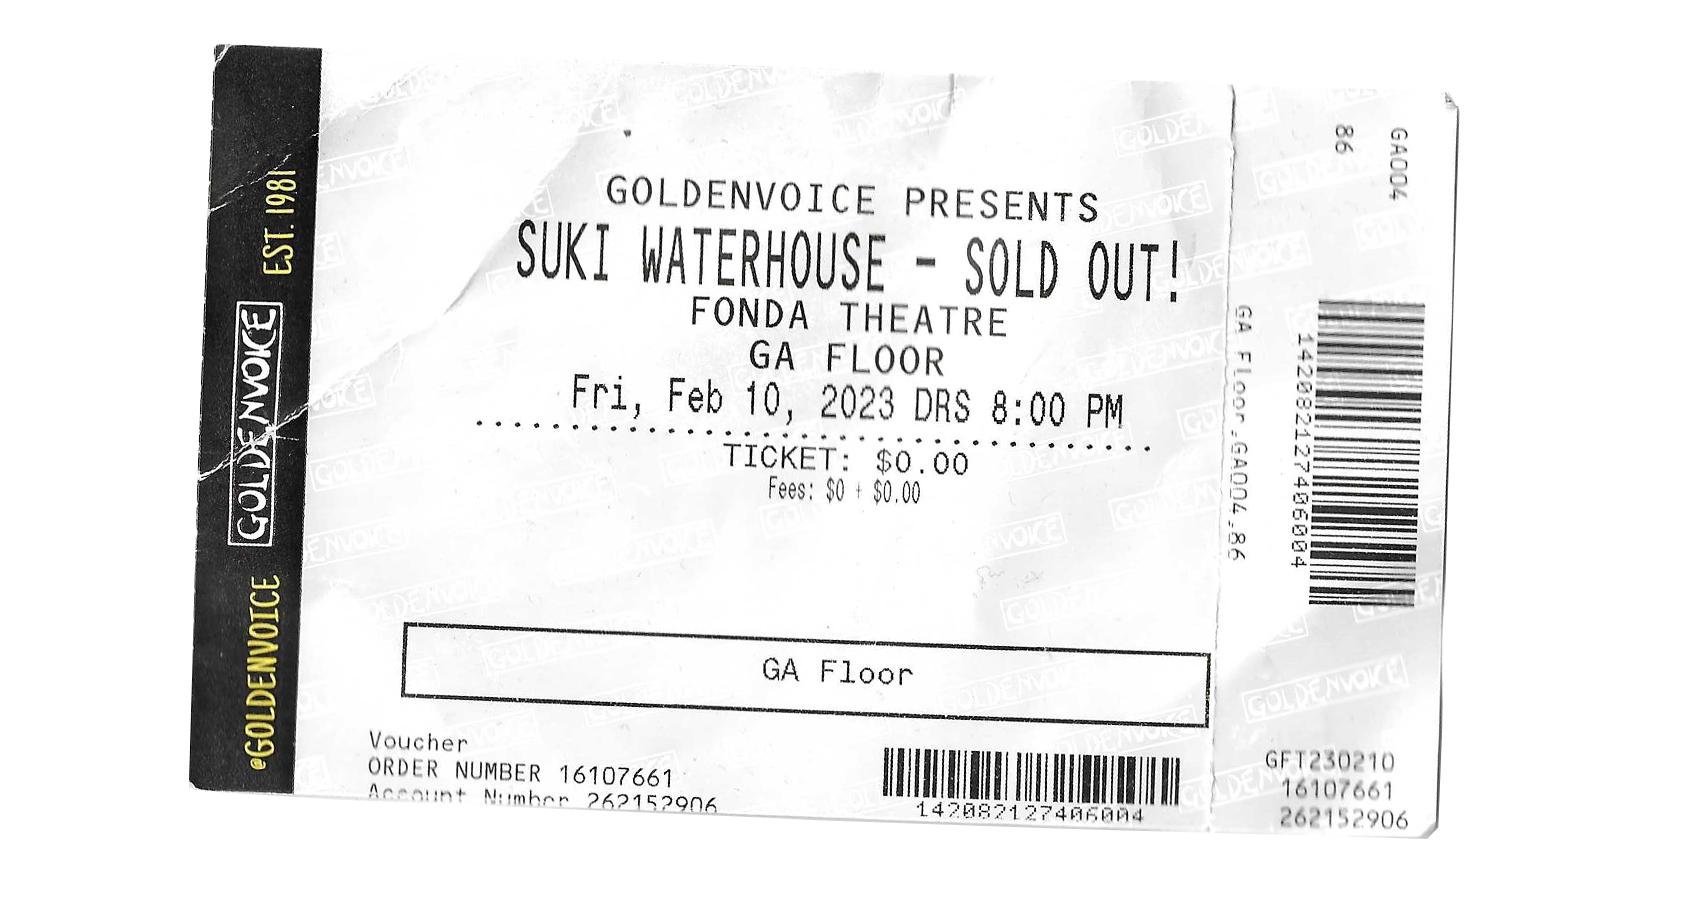 Ticket for Suki's sold out show at Fonda Theatre